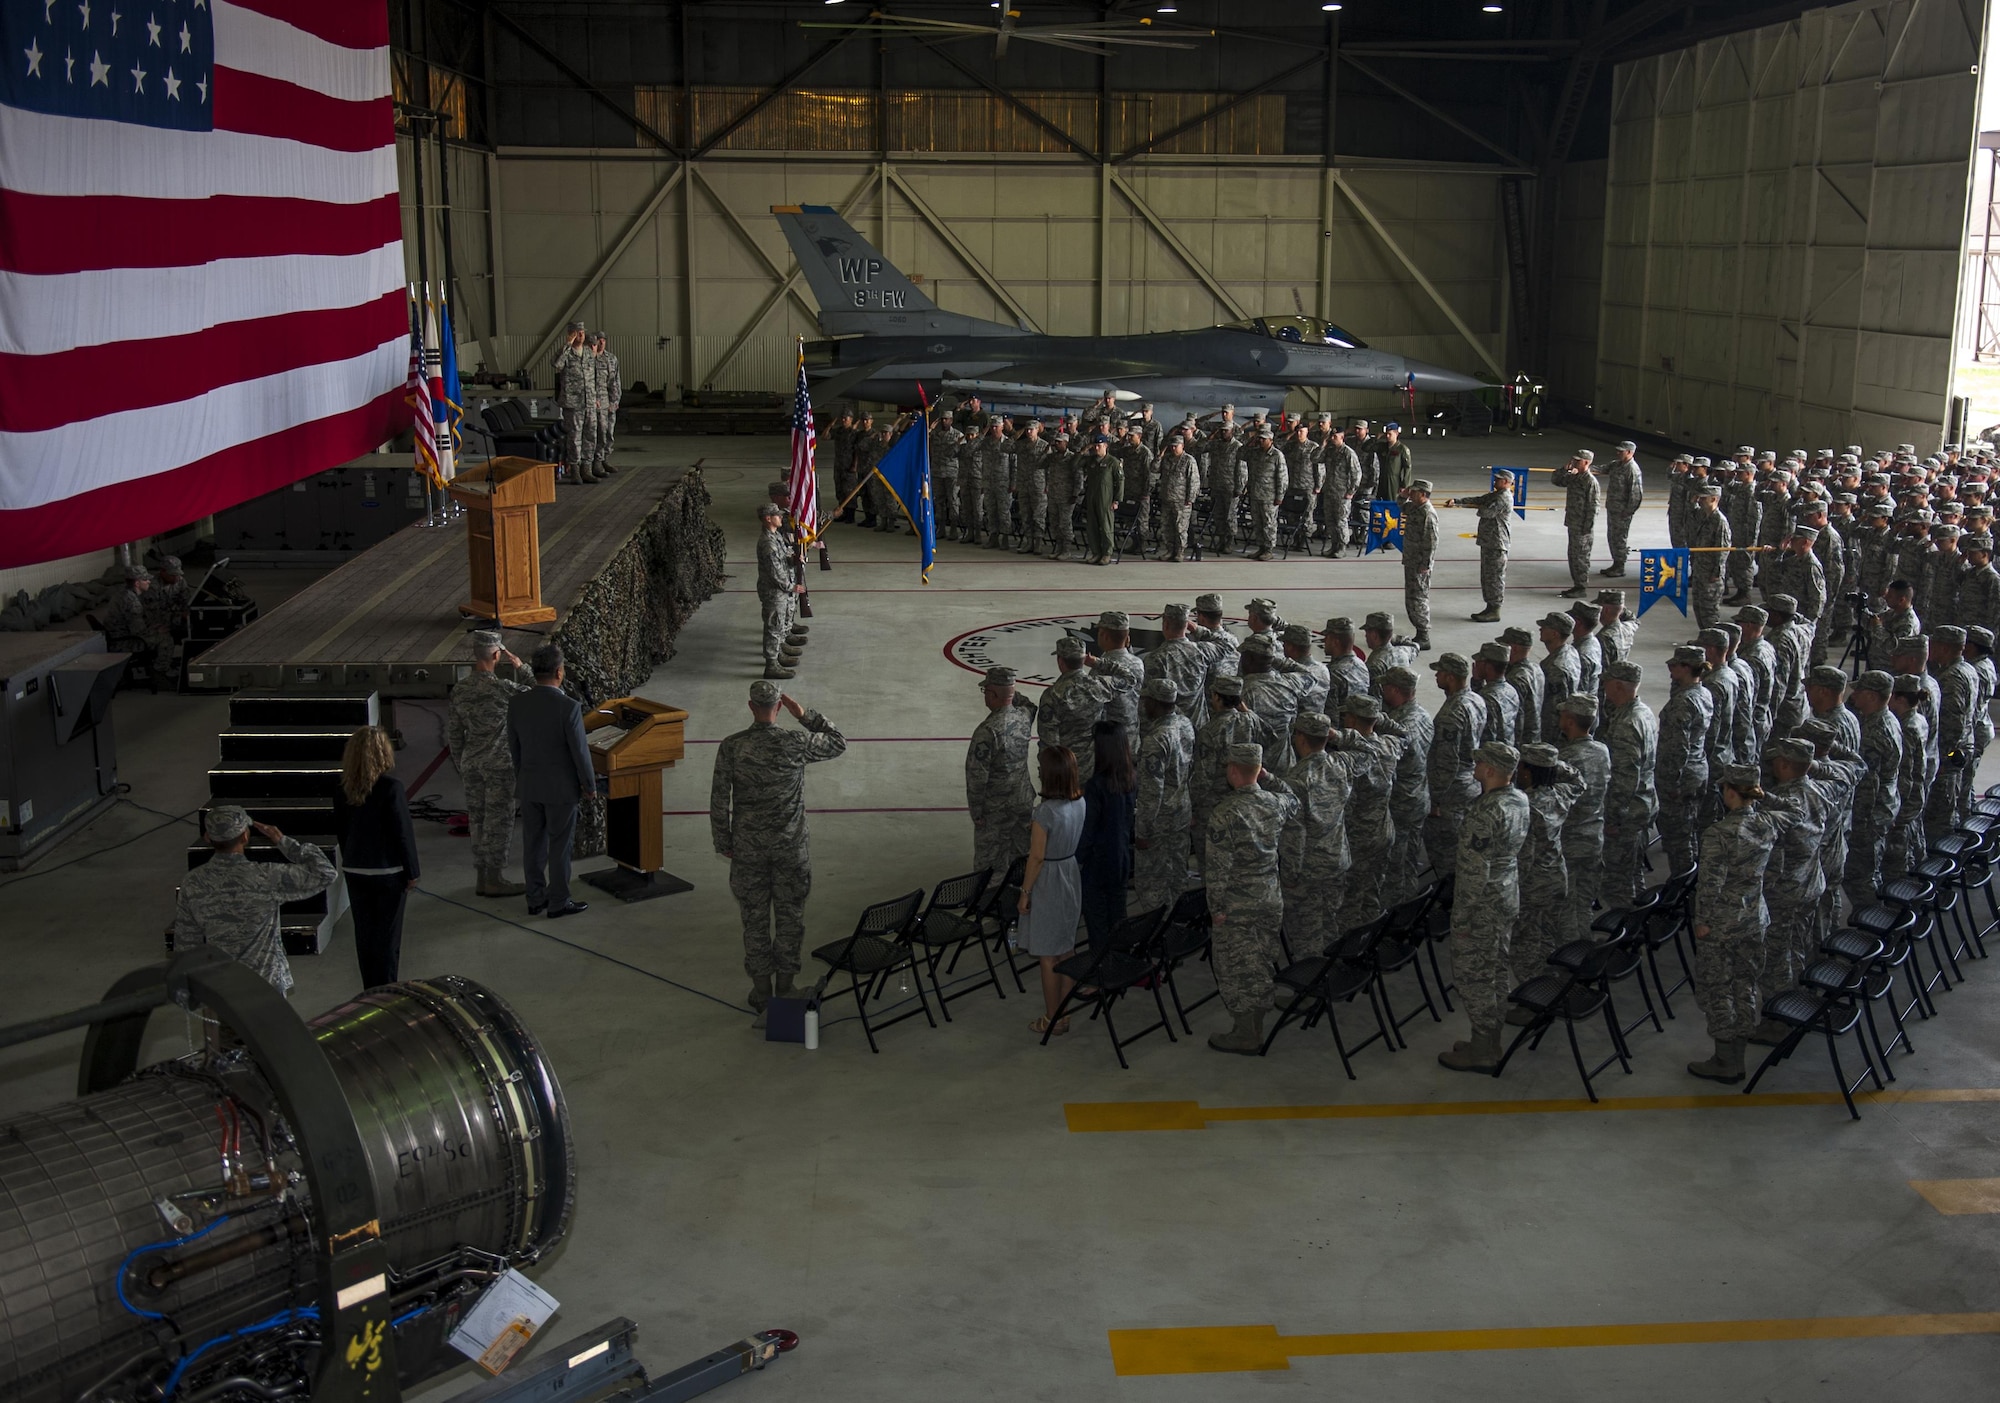 U.S. Air Force Col. David Shoemaker, 8th Fighter Wing commander, Col. James Long, 8th Maintenance Group outgoing commander, and Col. George Sebren, 8th MXG incoming commander, salute June 28, 2017, during a change of command ceremony at Kunsan Air Base, Republic of Korea. During the ceremony, Long relinquished command of the 8th MXG to Sebren. (U.S. Air Force photo by Senior Airman Colville McFee/Released)